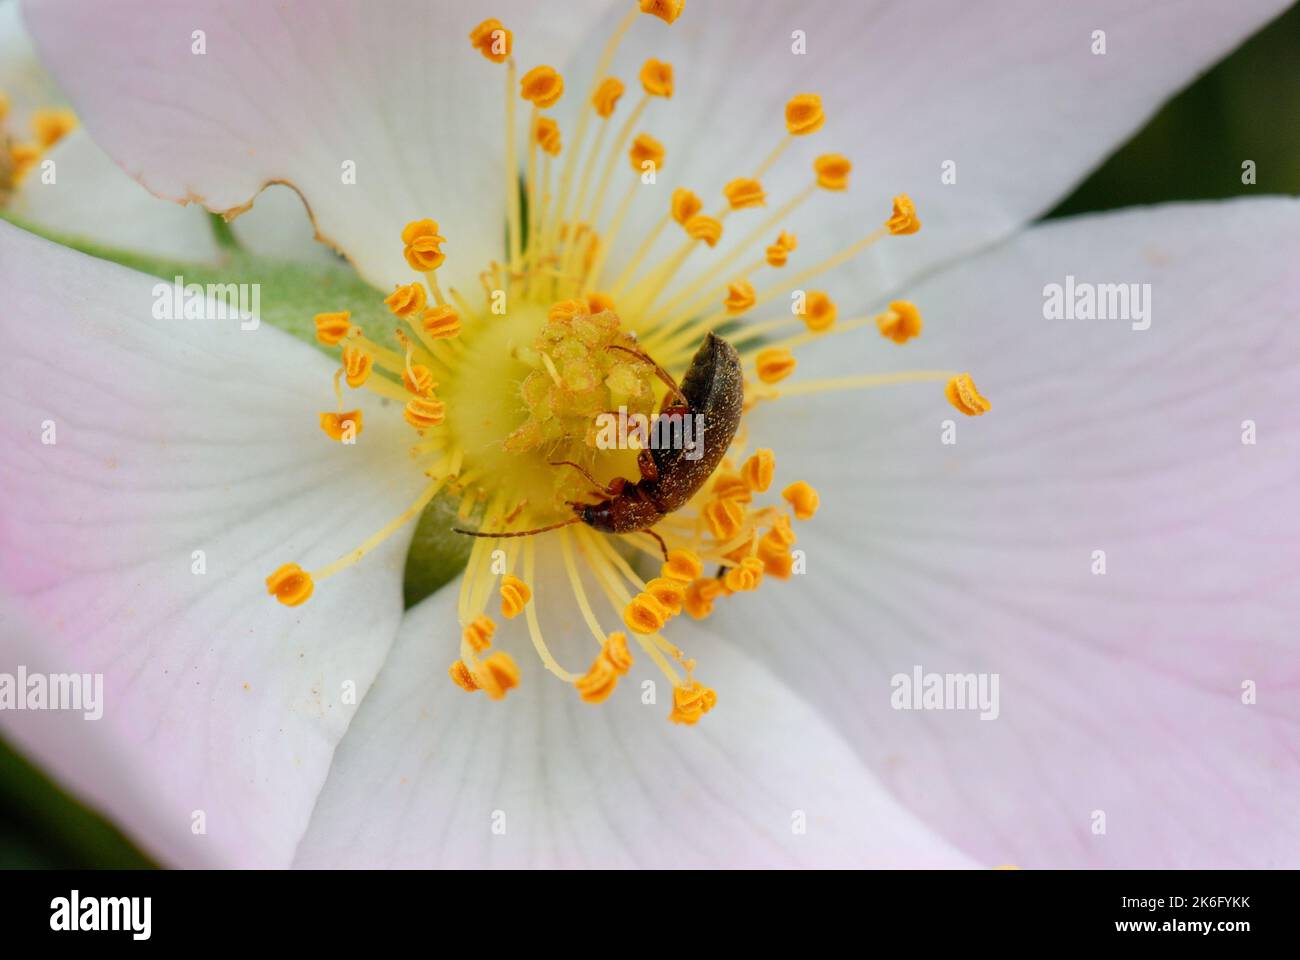 Small black beetle covered in pollen on yellow flower Stock Photo